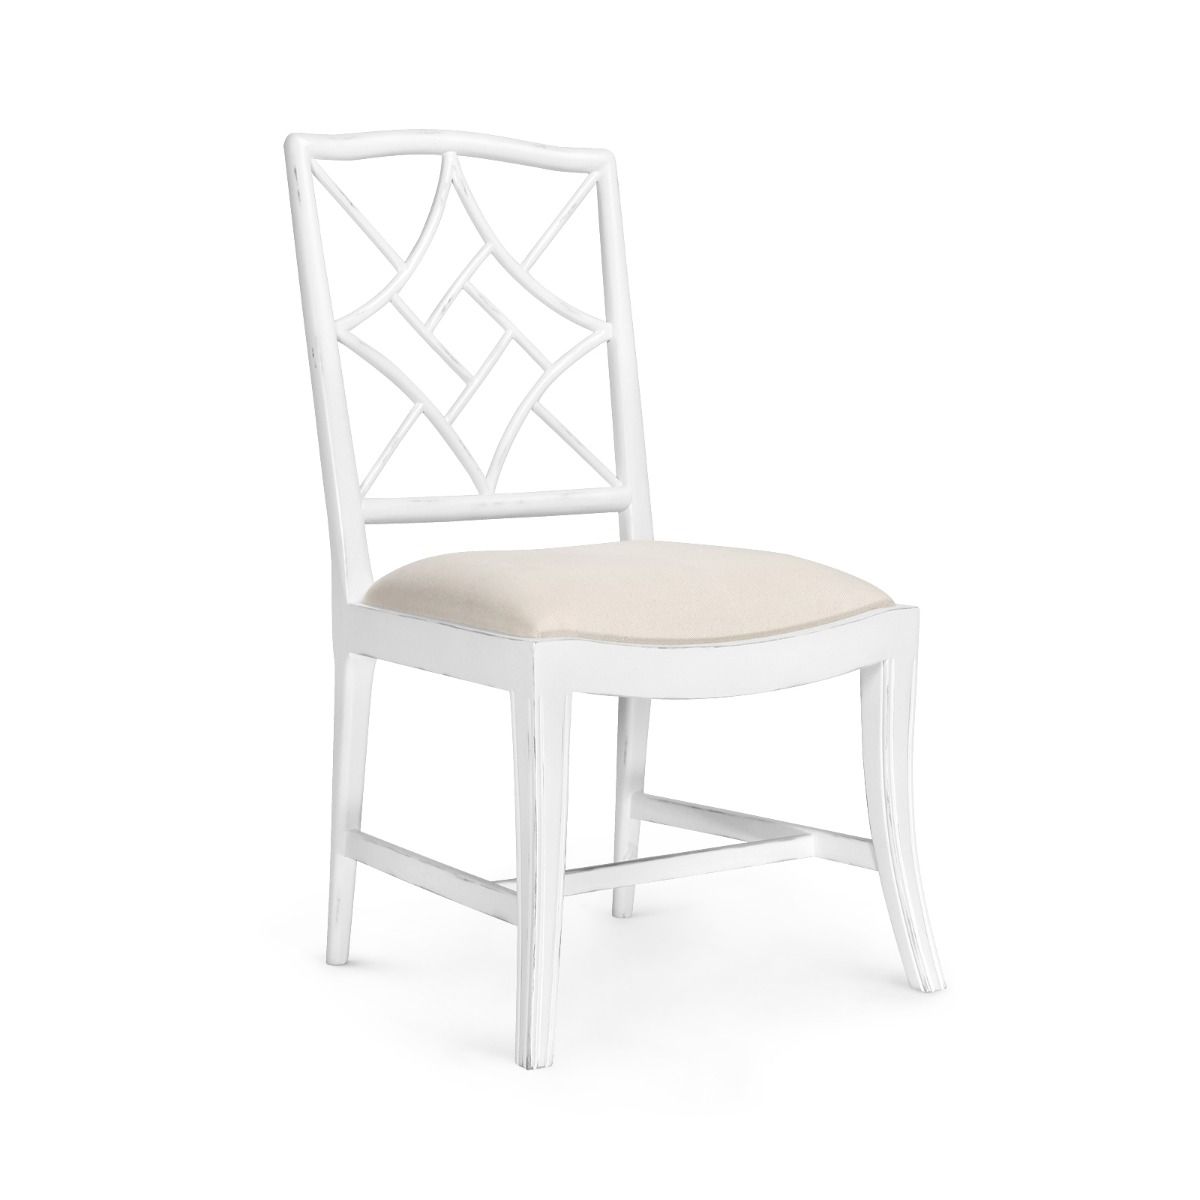 Evelyn Side Chair, White Dining Chair Bungalow 5     Four Hands, Burke Decor, Mid Century Modern Furniture, Old Bones Furniture Company, Old Bones Co, Modern Mid Century, Designer Furniture, https://www.oldbonesco.com/